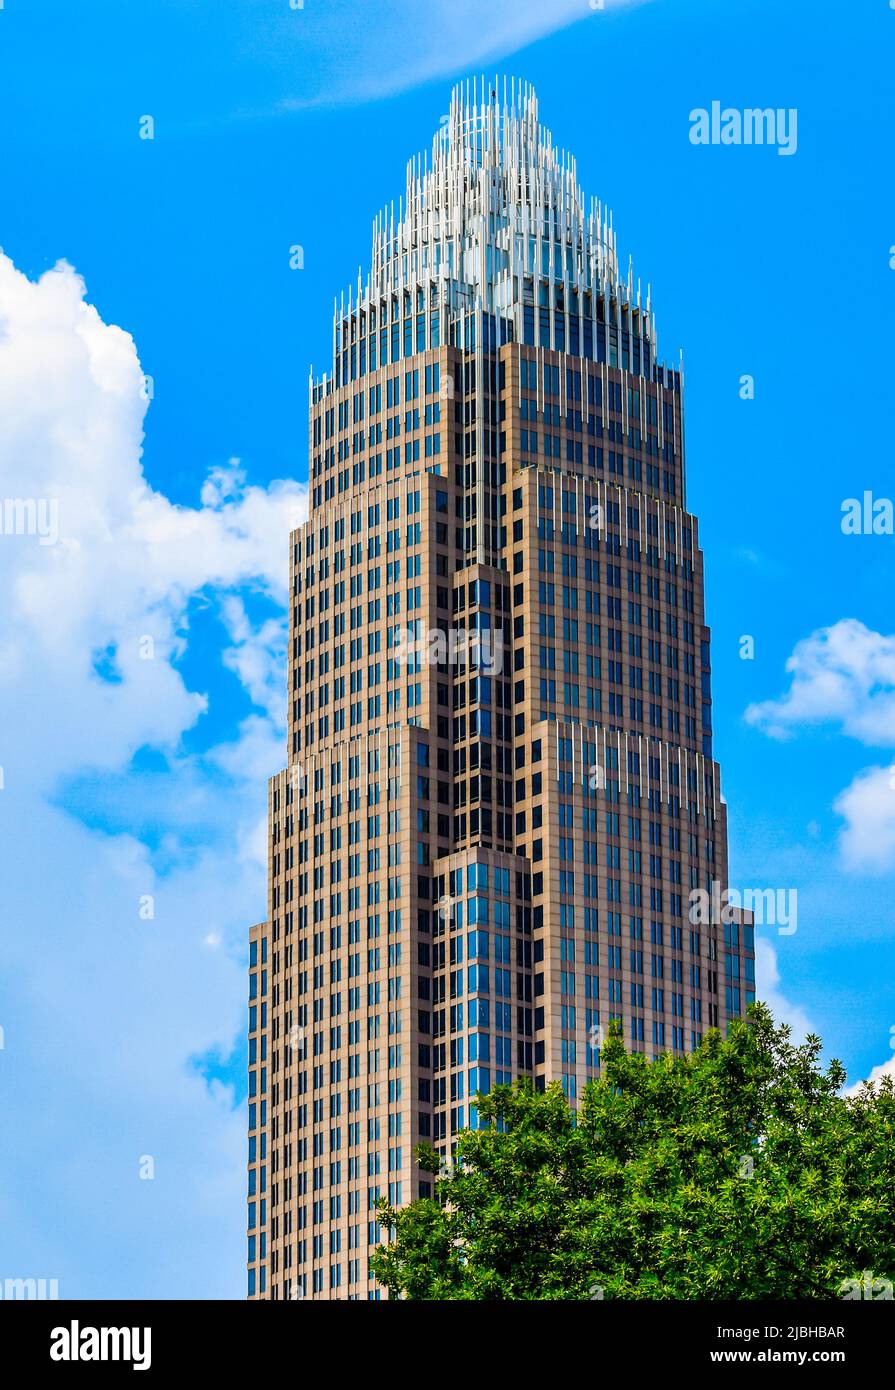 Bank of America corporate headquarters, the tallest commercial high rise in uptown Charlotte, North Carolina on a sunny day with blue sky and clouds. Stock Photo